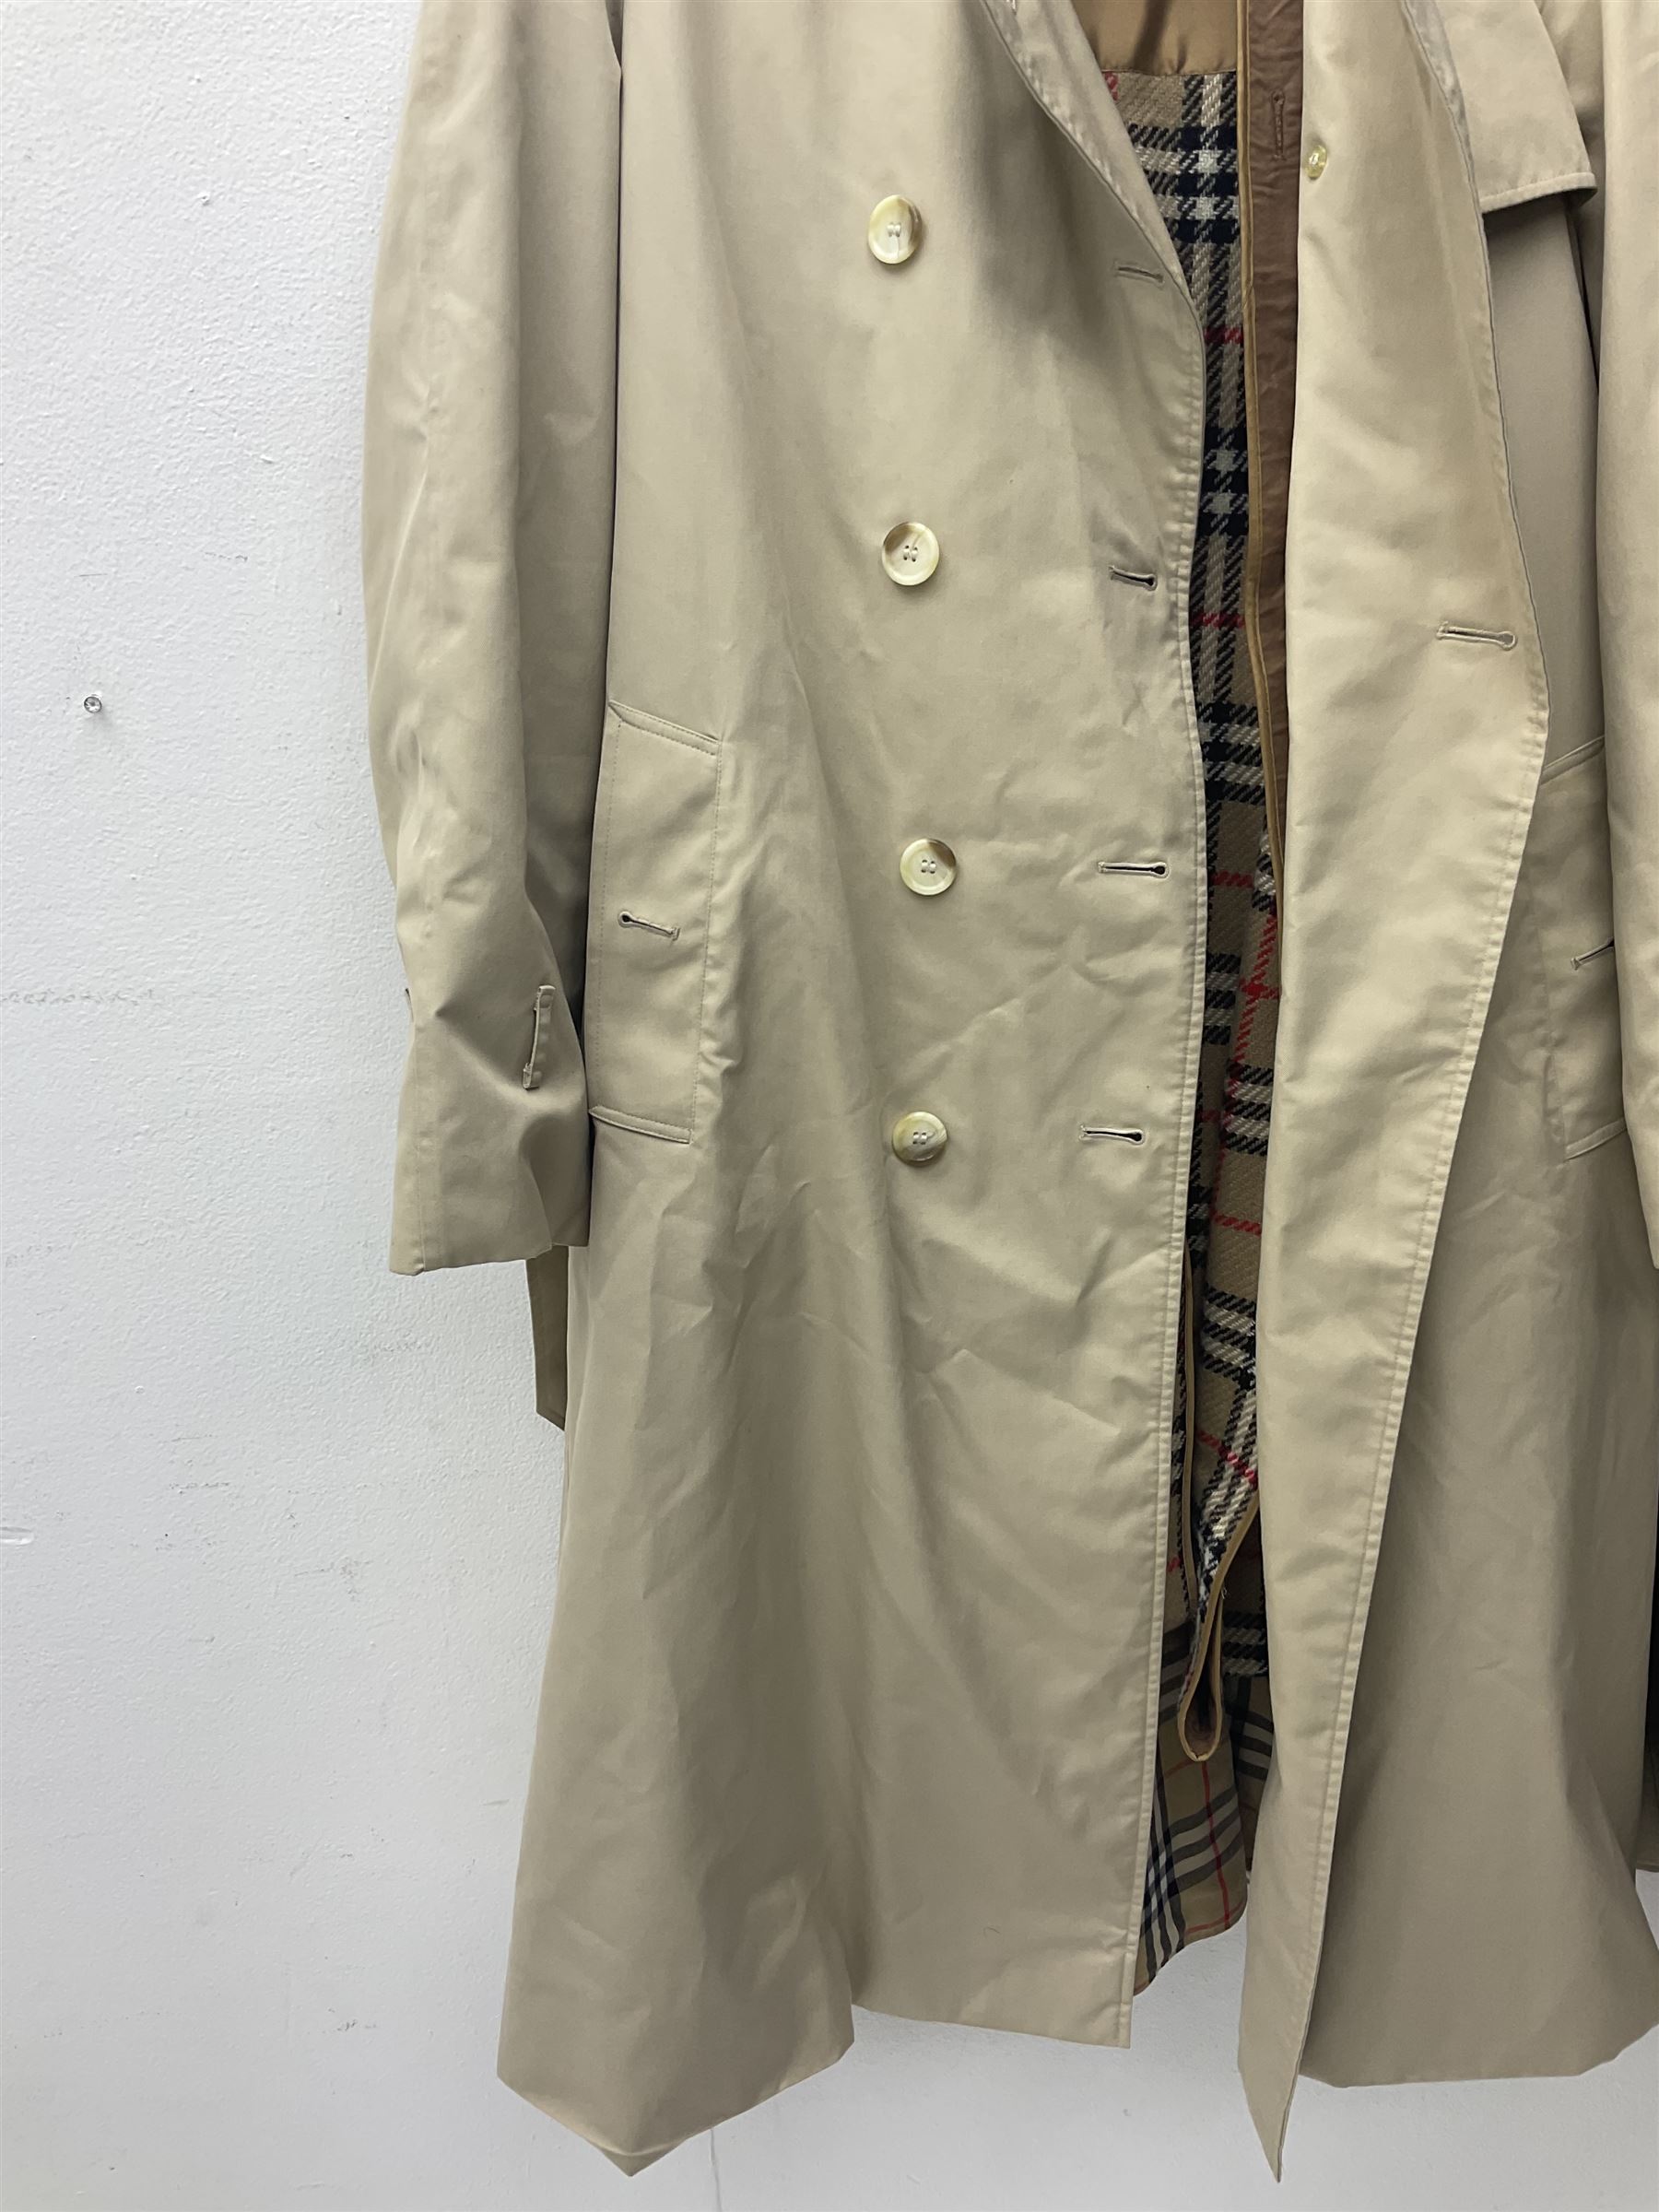 Ladies Burberry double breasted trench coat - Image 4 of 25